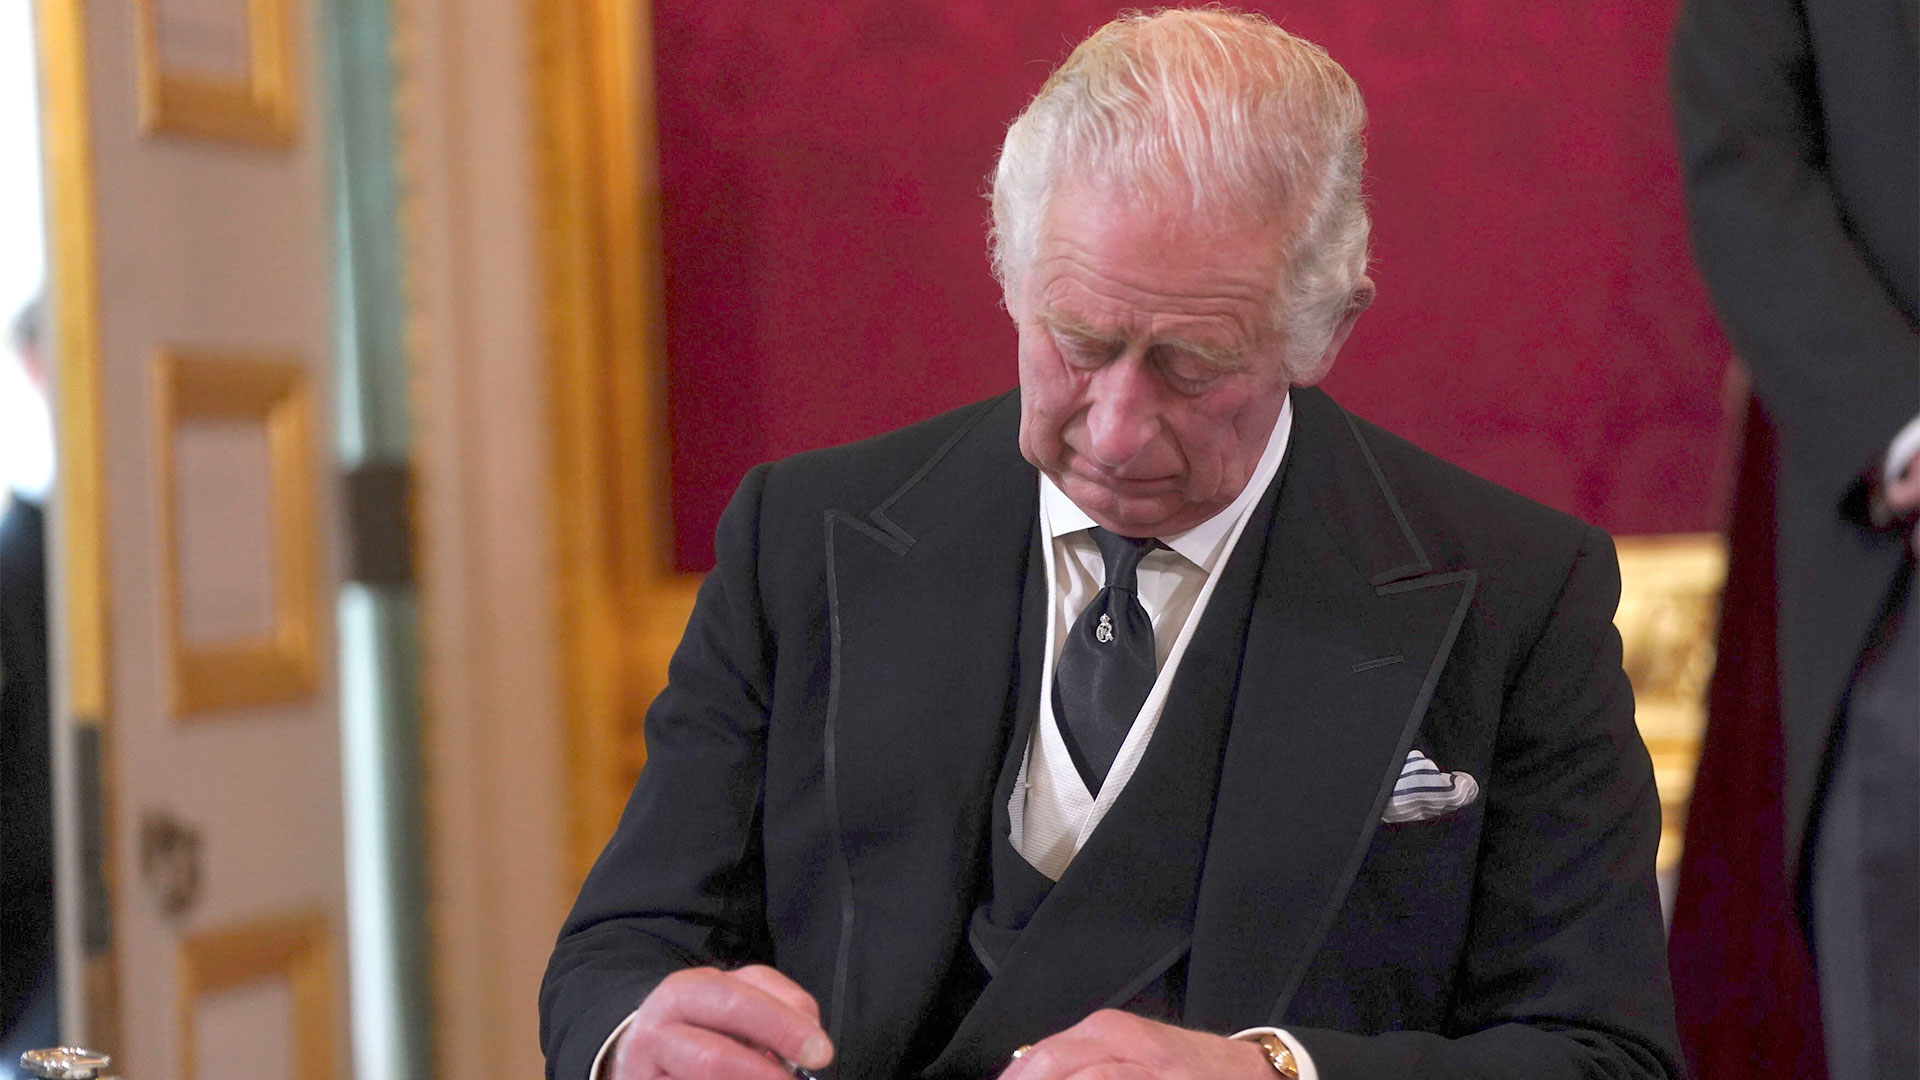 At Hillsborough Castle, as he signed the guest book, King Charles exploded upon realizing the pen was leaking ink and immediately stormed out of the room exclaiming 